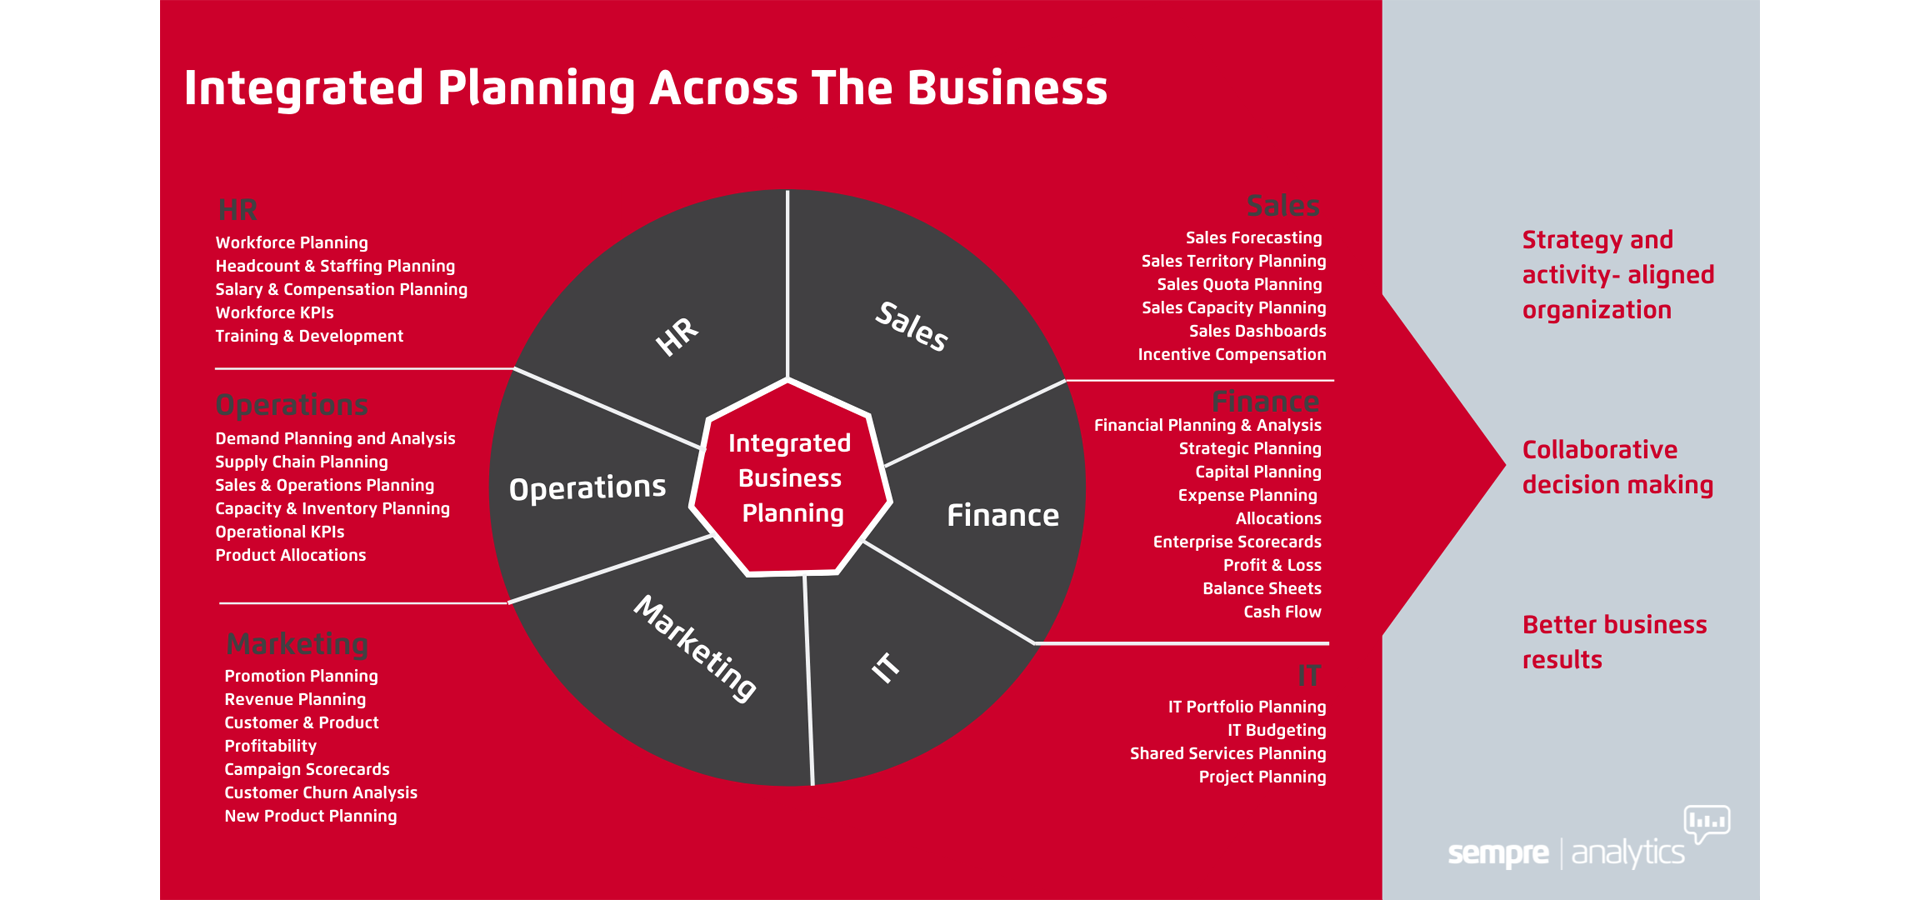 Integrated Planning Across The Business infographic